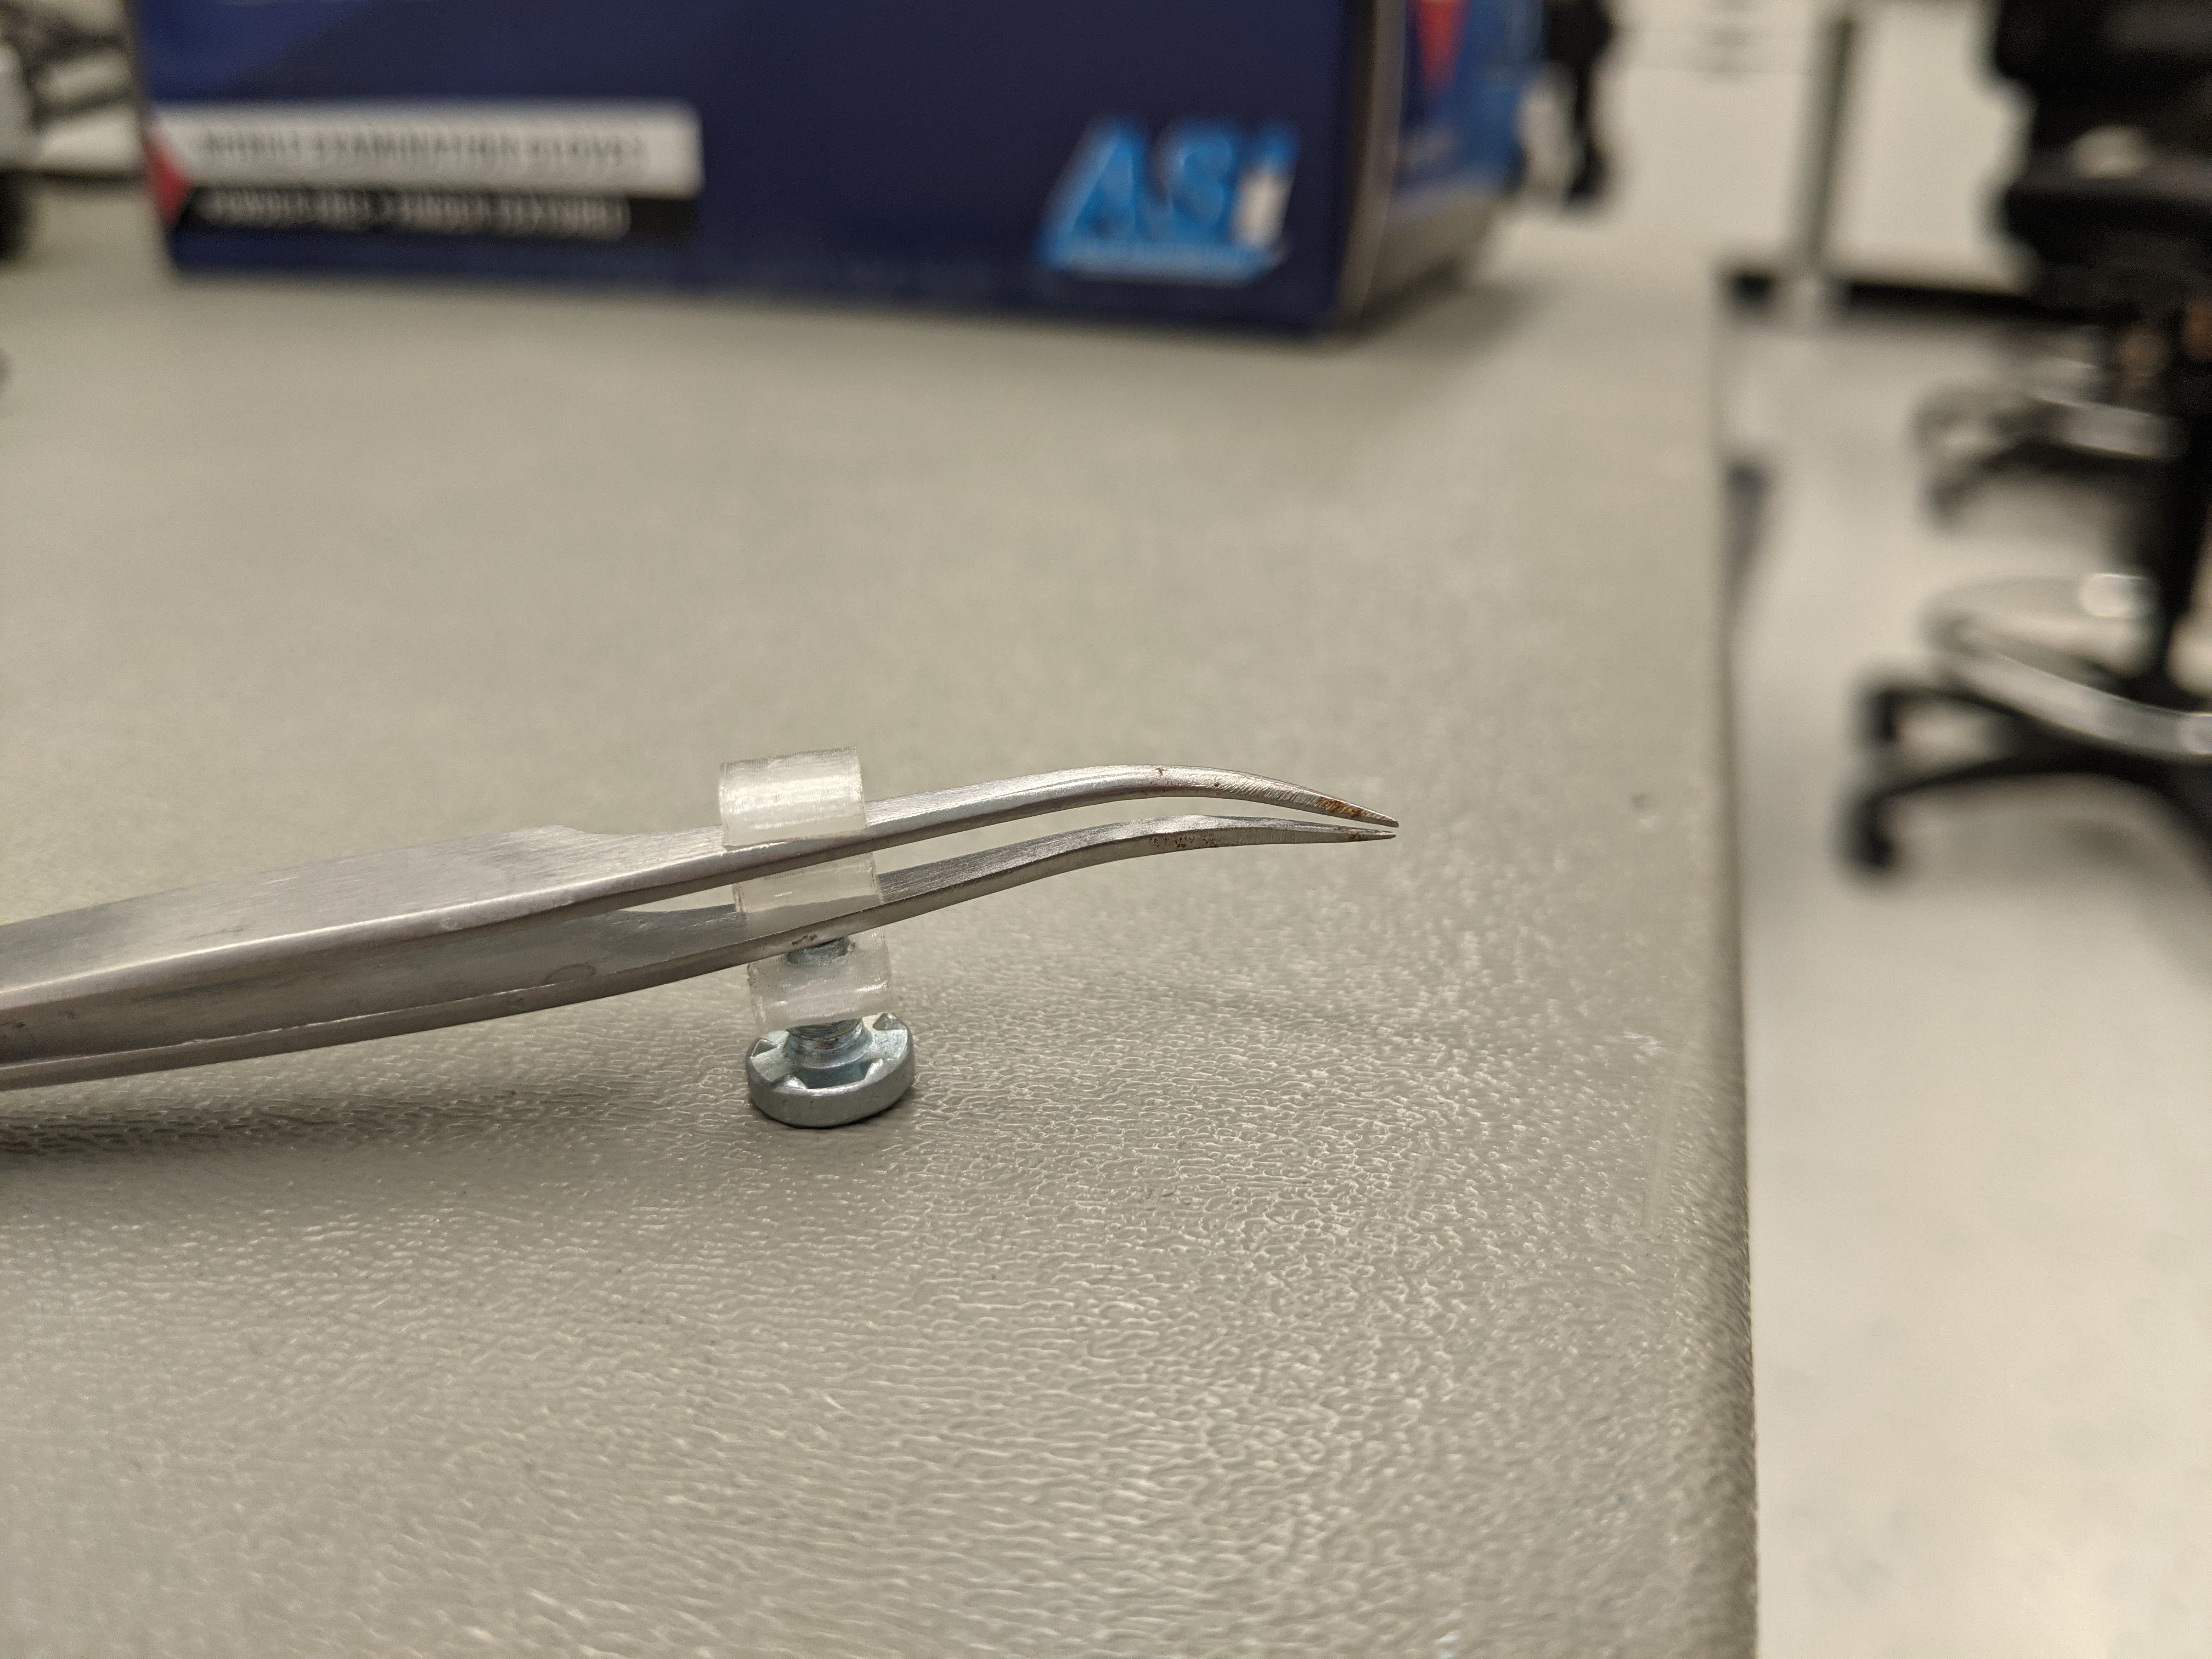 The adjustable limiter mounted on a tweezer